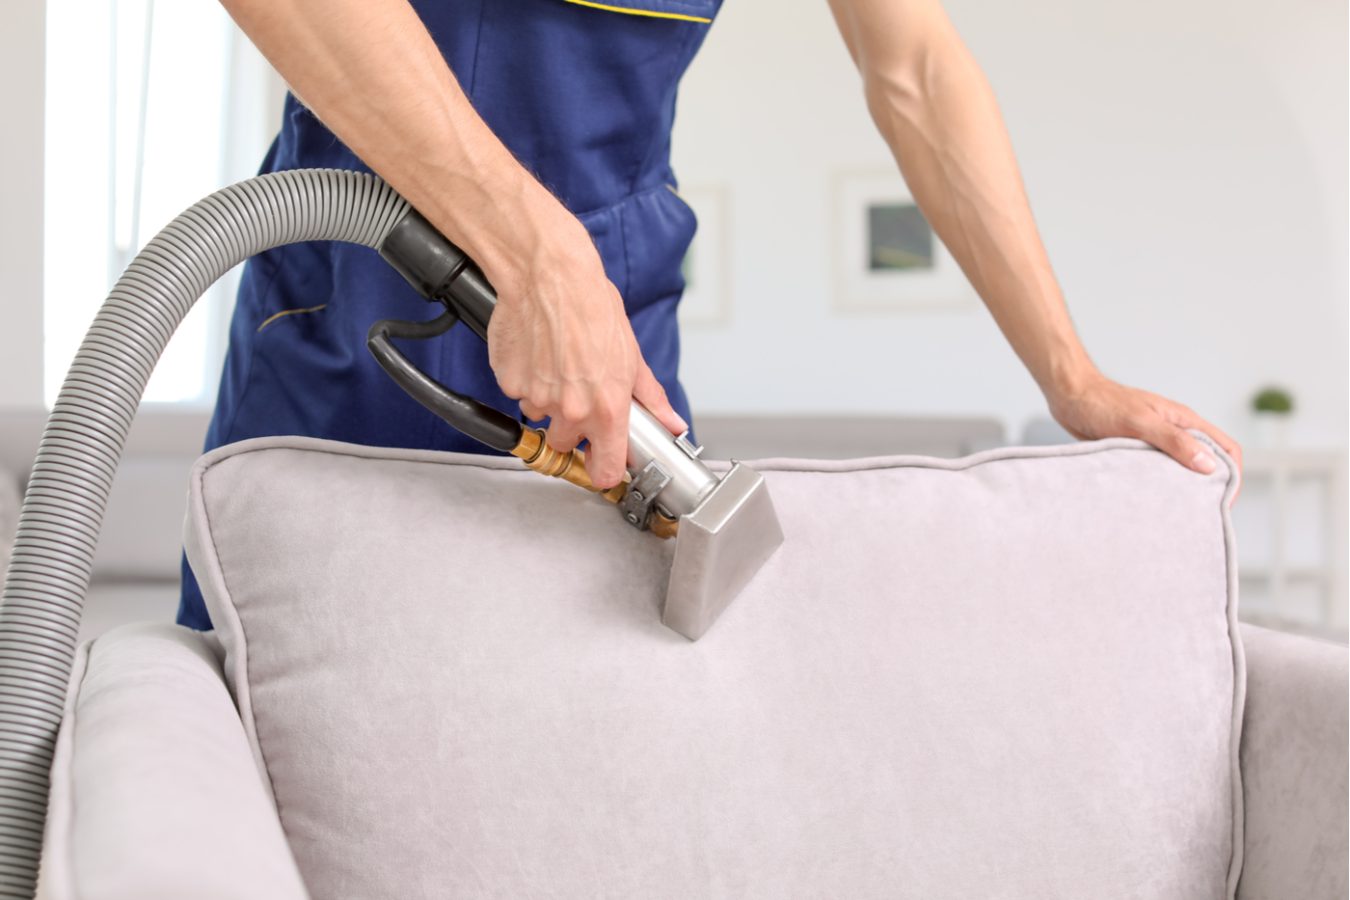 can you upholstery clean a mattress